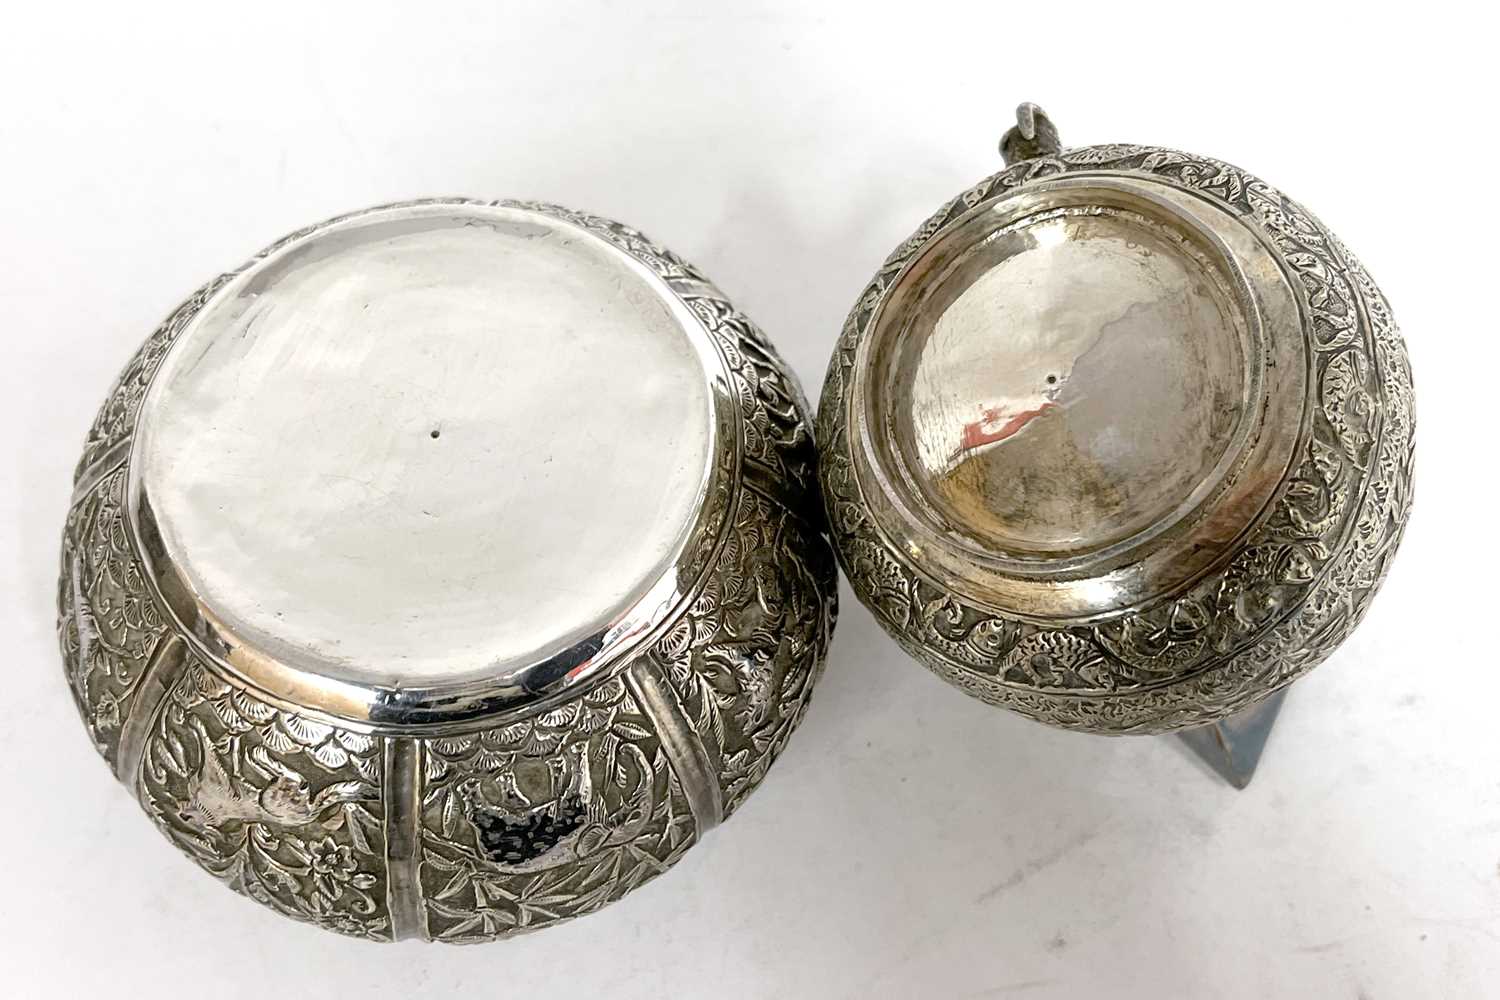 Antique Indian silver tea set 'Lucknow Circa 1900' with elephant and cobra design, comprising - Image 14 of 23